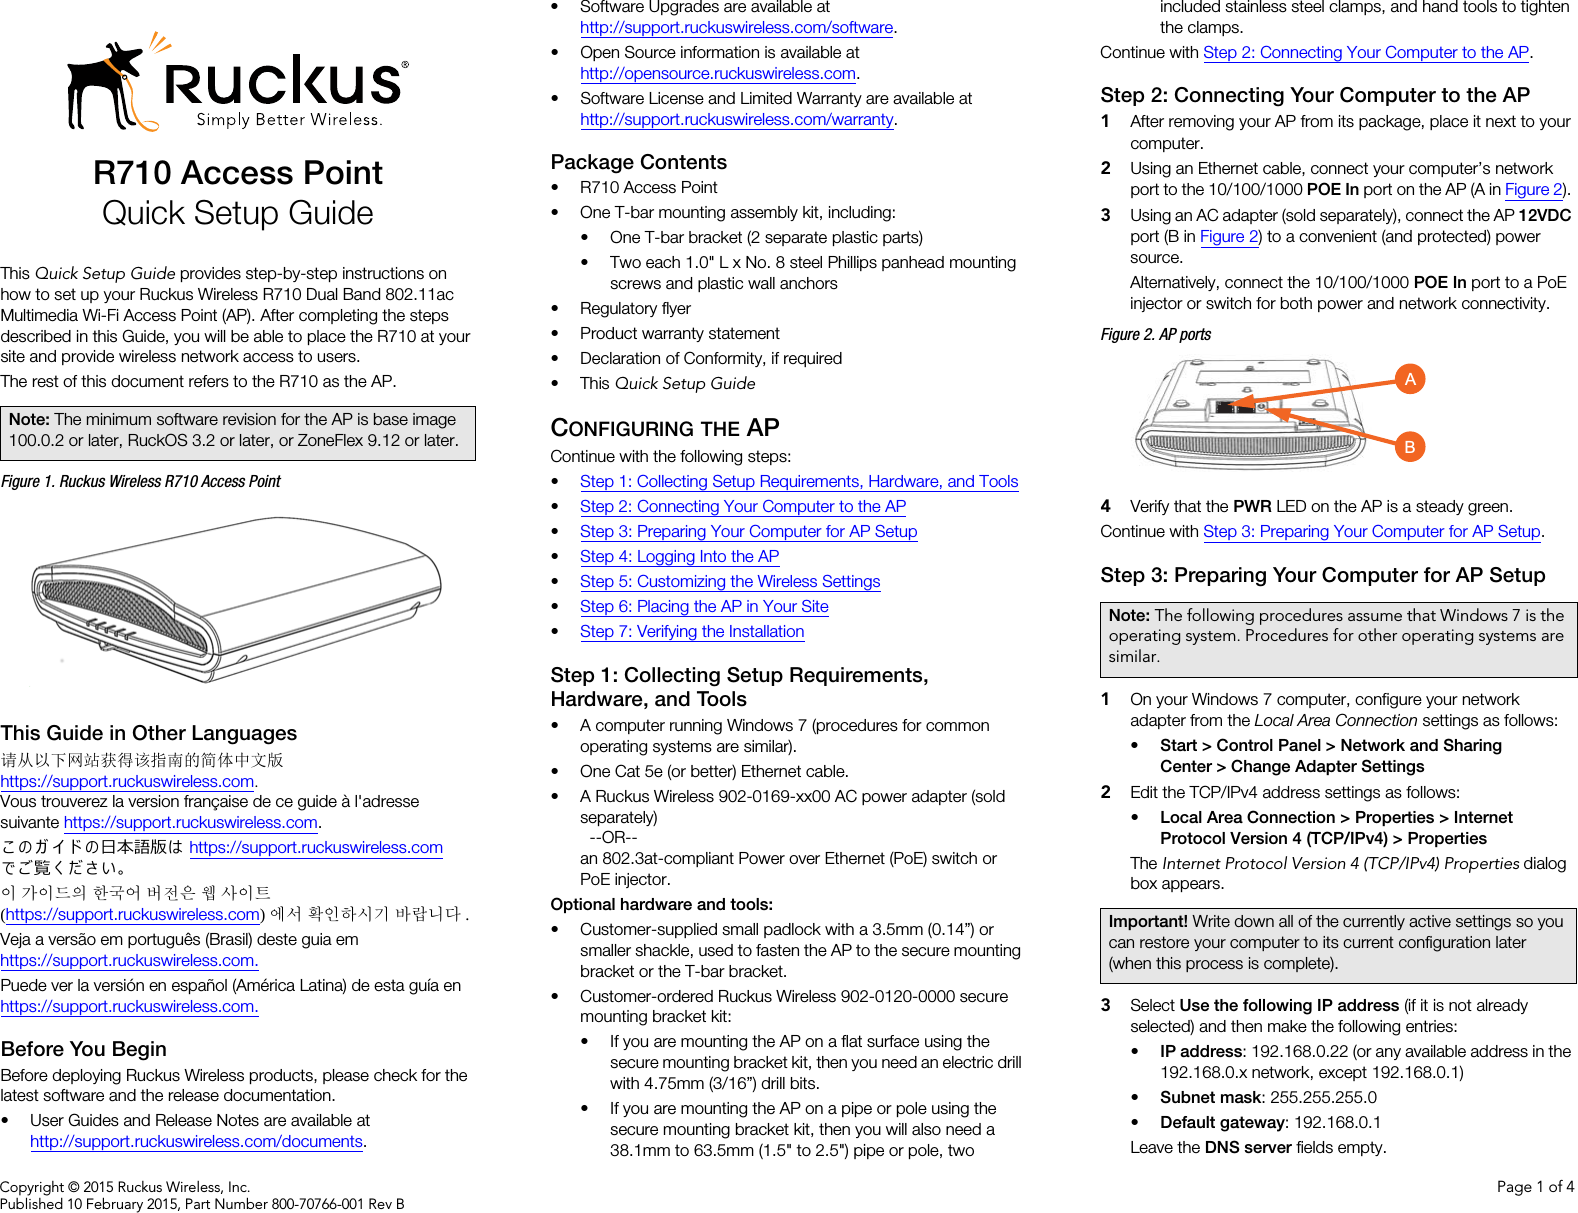 Copyright © 2015 Ruckus Wireless, Inc. Page 1 of 4Published 10 February 2015, Part Number 800-70766-001 Rev BR710 Access PointQuick Setup GuideThis Quick Setup Guide provides step-by-step instructions on how to set up your Ruckus Wireless R710 Dual Band 802.11ac Multimedia Wi-Fi Access Point (AP). After completing the steps described in this Guide, you will be able to place the R710 at your site and provide wireless network access to users.The rest of this document refers to the R710 as the AP.Figure 1. Ruckus Wireless R710 Access PointThis Guide in Other Languages请从以下网站获得该指南的简体中文版 https://support.ruckuswireless.com.Vous trouverez la version française de ce guide à l&apos;adresse suivante https://support.ruckuswireless.com.こ の ガ イ ド の日本語版は https://support.ruckuswireless.com でご覧く ださい。이 가이드의 한국어 버전은 웹 사이트(https://support.ruckuswireless.com)에서 확인하시기 바랍니다 .Veja a versão em português (Brasil) deste guia em https://support.ruckuswireless.com.Puede ver la versión en español (América Latina) de esta guía en https://support.ruckuswireless.com.Before You BeginBefore deploying Ruckus Wireless products, please check for the latest software and the release documentation.• User Guides and Release Notes are available at http://support.ruckuswireless.com/documents.• Software Upgrades are available athttp://support.ruckuswireless.com/software.• Open Source information is available athttp://opensource.ruckuswireless.com.• Software License and Limited Warranty are available at http://support.ruckuswireless.com/warranty.Package Contents• R710 Access Point• One T-bar mounting assembly kit, including:• One T-bar bracket (2 separate plastic parts)• Two each 1.0&quot; L x No. 8 steel Phillips panhead mounting screws and plastic wall anchors• Regulatory flyer• Product warranty statement• Declaration of Conformity, if required•This Quick Setup GuideCONFIGURING THE APContinue with the following steps:•Step 1: Collecting Setup Requirements, Hardware, and Tools•Step 2: Connecting Your Computer to the AP•Step 3: Preparing Your Computer for AP Setup•Step 4: Logging Into the AP•Step 5: Customizing the Wireless Settings•Step 6: Placing the AP in Your Site•Step 7: Verifying the InstallationStep 1: Collecting Setup Requirements, Hardware, and Tools • A computer running Windows 7 (procedures for common operating systems are similar).• One Cat 5e (or better) Ethernet cable.• A Ruckus Wireless 902-0169-xx00 AC power adapter (sold separately) --OR--an 802.3at-compliant Power over Ethernet (PoE) switch or PoE injector.Optional hardware and tools: • Customer-supplied small padlock with a 3.5mm (0.14”) or smaller shackle, used to fasten the AP to the secure mounting bracket or the T-bar bracket.• Customer-ordered Ruckus Wireless 902-0120-0000 secure mounting bracket kit:• If you are mounting the AP on a flat surface using the secure mounting bracket kit, then you need an electric drill with 4.75mm (3/16”) drill bits.• If you are mounting the AP on a pipe or pole using the secure mounting bracket kit, then you will also need a 38.1mm to 63.5mm (1.5&quot; to 2.5&quot;) pipe or pole, two included stainless steel clamps, and hand tools to tighten the clamps.Continue with Step 2: Connecting Your Computer to the AP.Step 2: Connecting Your Computer to the AP1After removing your AP from its package, place it next to your computer.2Using an Ethernet cable, connect your computer’s network port to the 10/100/1000 POE In port on the AP (A in Figure 2). 3Using an AC adapter (sold separately), connect the AP 12VDC port (B in Figure 2) to a convenient (and protected) power source. Alternatively, connect the 10/100/1000 POE In port to a PoE injector or switch for both power and network connectivity.Figure 2. AP ports4Verify that the PWR LED on the AP is a steady green.Continue with Step 3: Preparing Your Computer for AP Setup.Step 3: Preparing Your Computer for AP Setup1On your Windows 7 computer, configure your network adapter from the Local Area Connection settings as follows:•Start &gt; Control Panel &gt; Network and Sharing Center &gt; Change Adapter Settings2Edit the TCP/IPv4 address settings as follows: •Local Area Connection &gt; Properties &gt; Internet Protocol Version 4 (TCP/IPv4) &gt; PropertiesThe Internet Protocol Version 4 (TCP/IPv4) Properties dialog box appears.3Select Use the following IP address (if it is not already selected) and then make the following entries:•IP address: 192.168.0.22 (or any available address in the 192.168.0.x network, except 192.168.0.1)•Subnet mask: 255.255.255.0•Default gateway: 192.168.0.1Leave the DNS server fields empty.Note: The minimum software revision for the AP is base image 100.0.2 or later, RuckOS 3.2 or later, or ZoneFlex 9.12 or later.Note: The following procedures assume that Windows 7 is the operating system. Procedures for other operating systems are similar.Important! Write down all of the currently active settings so you can restore your computer to its current configuration later (when this process is complete).AB